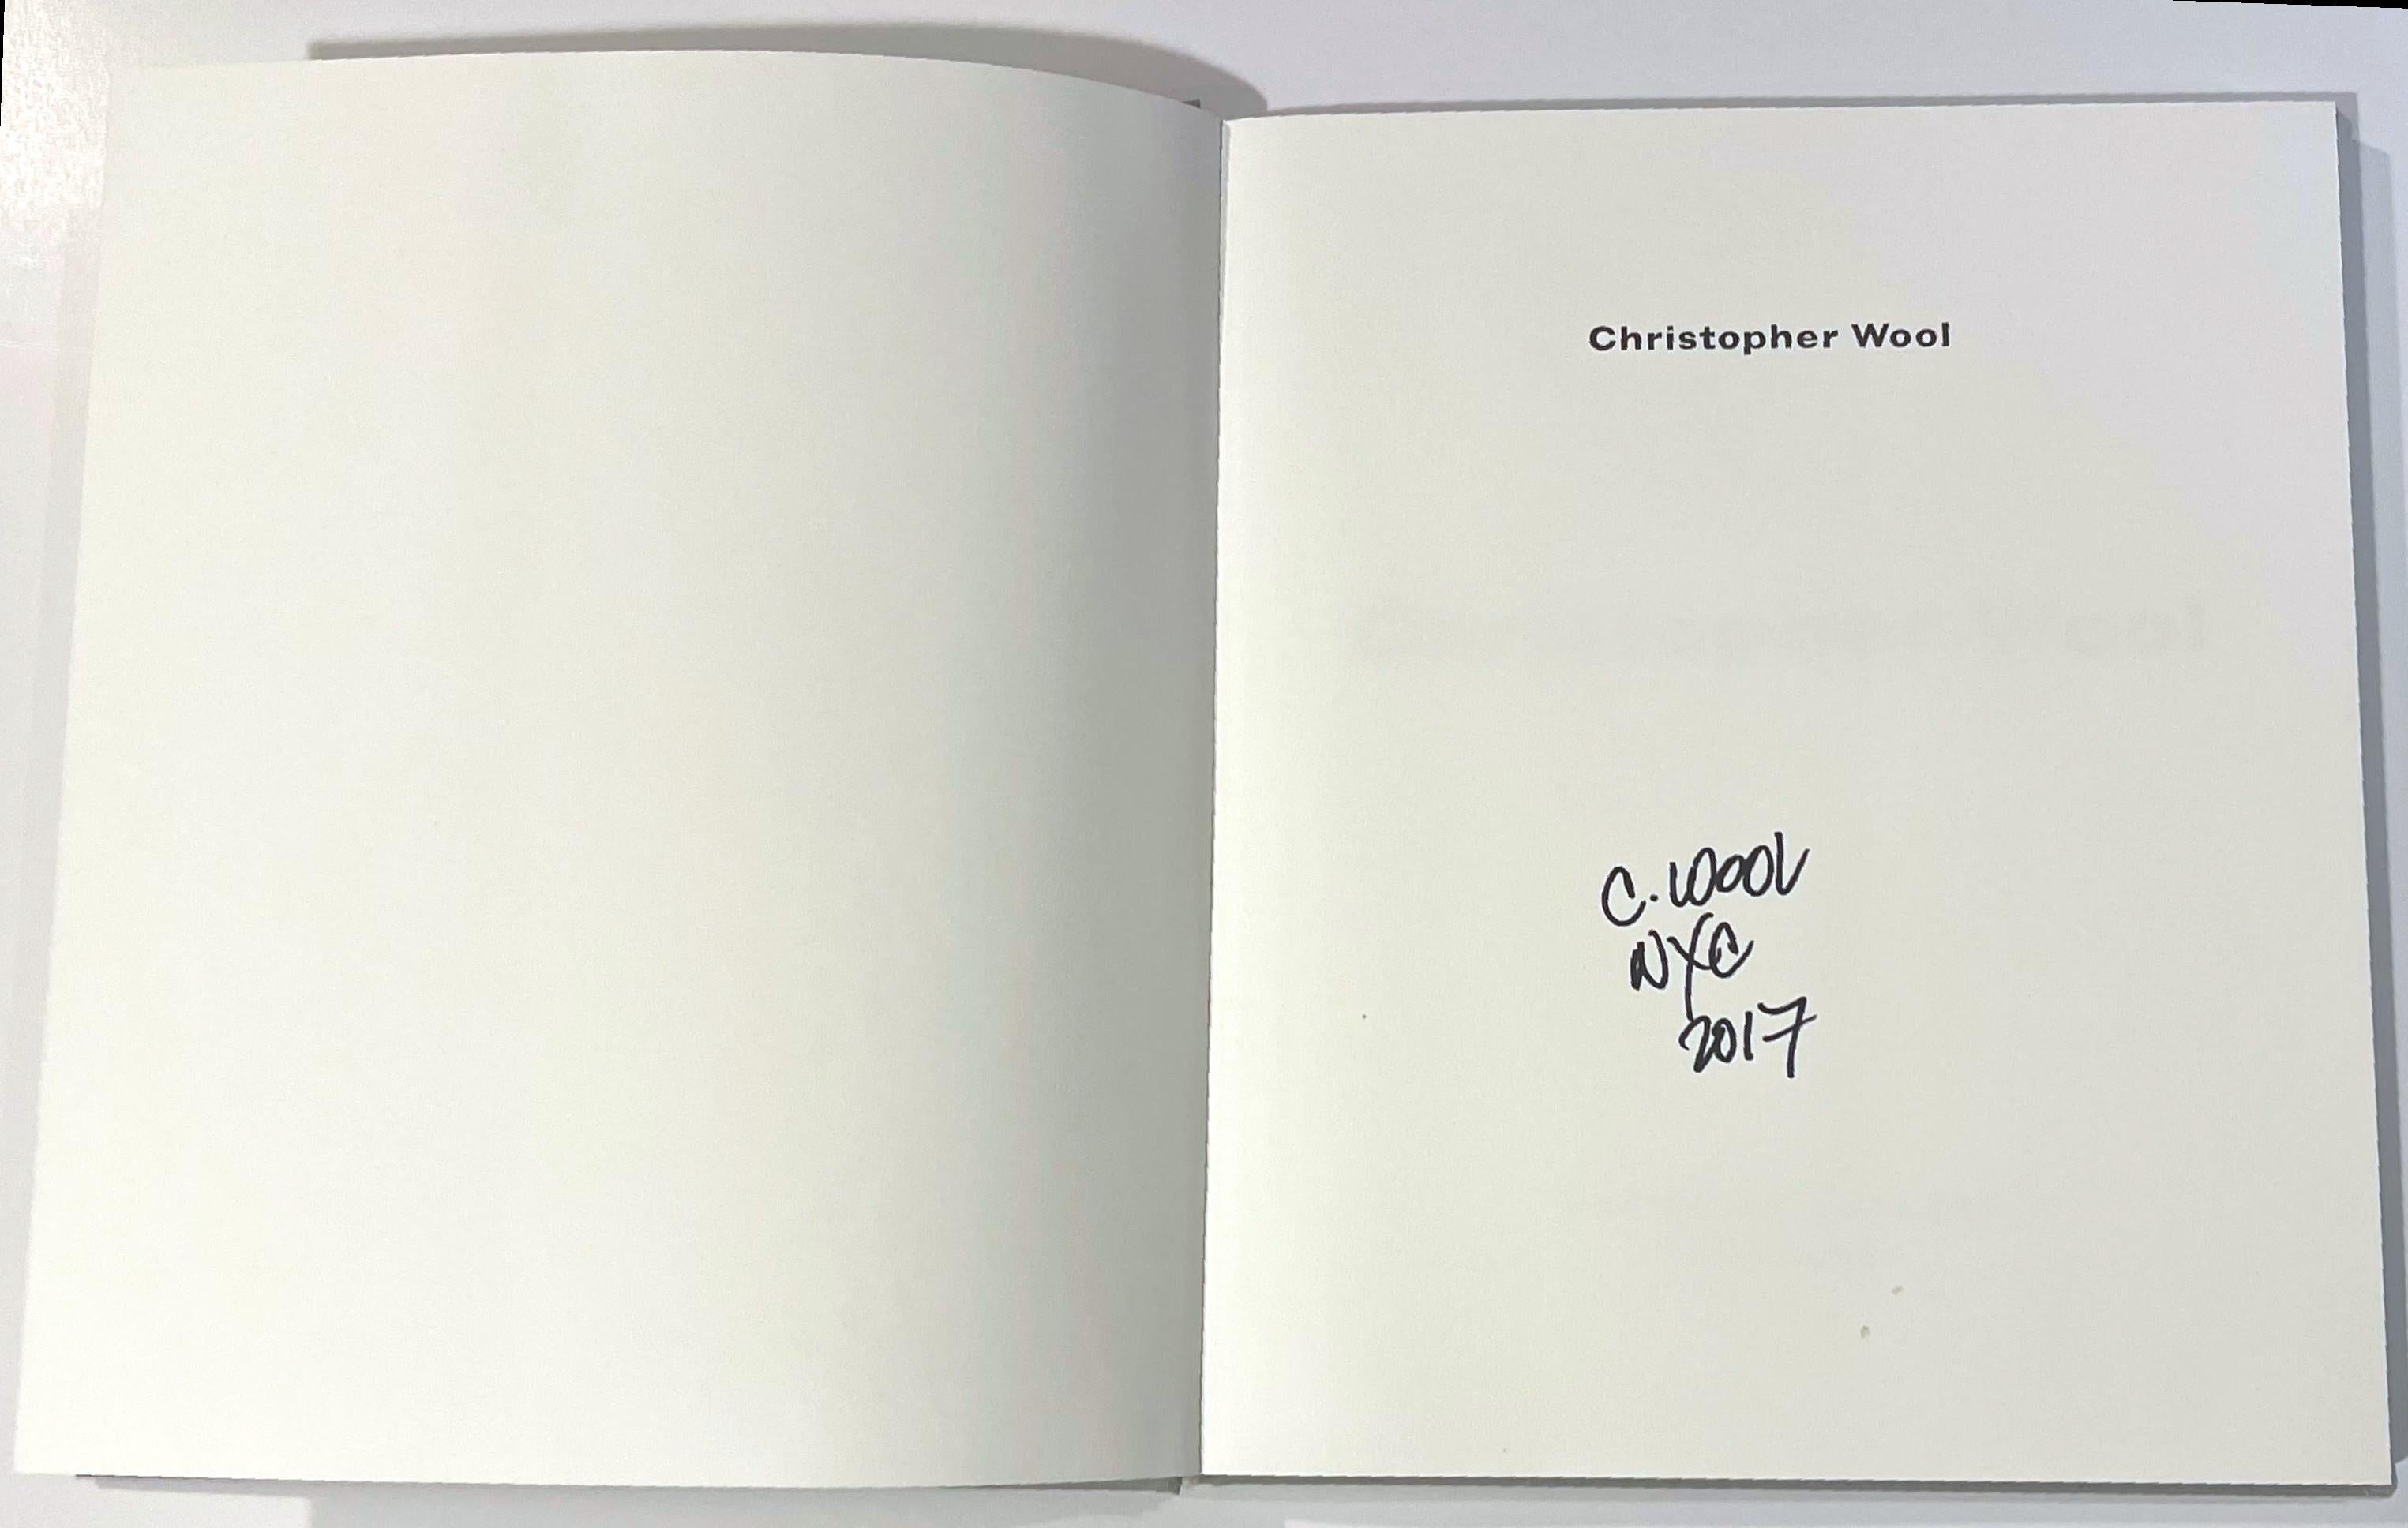 Christopher Wool (Hand signed and dated), 2006
Hardback monograph (hand signed and dated by Christopher Wool)
Hand signed and dated 2017 by Christopher Wool on the half-title page
12 1/4 × 10 1/4 × 3/4 inches
This elegant hardback monograph with